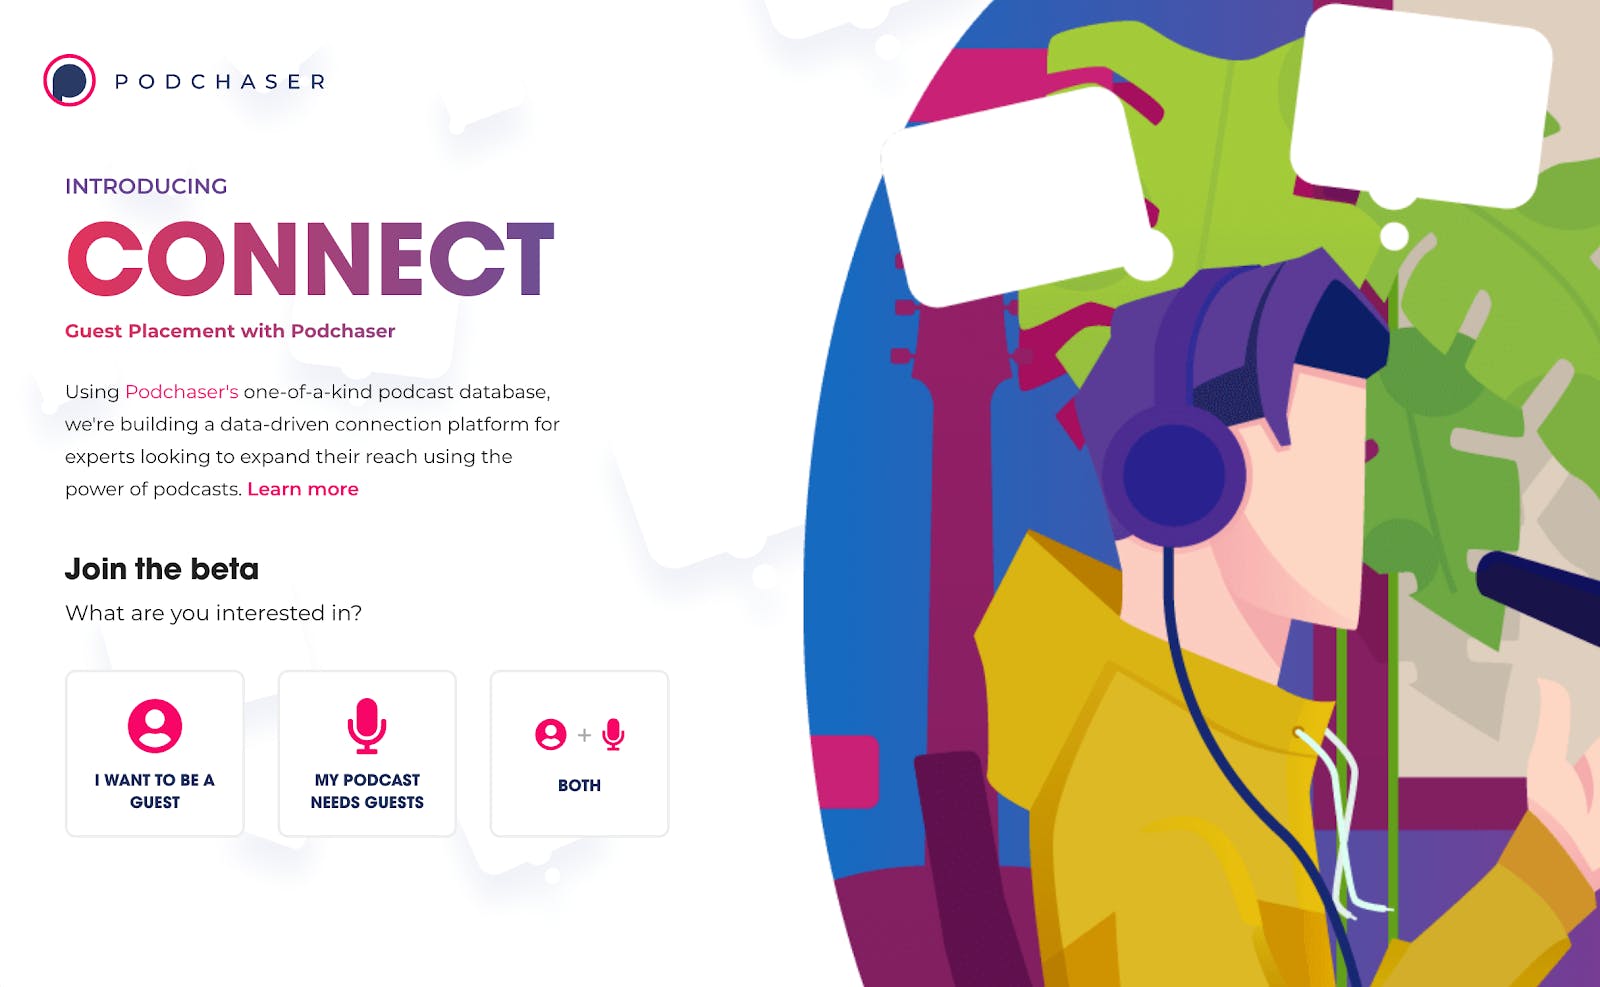 Podchaser Connect homepage with cartoon image of podcaster talking into a podcast mic